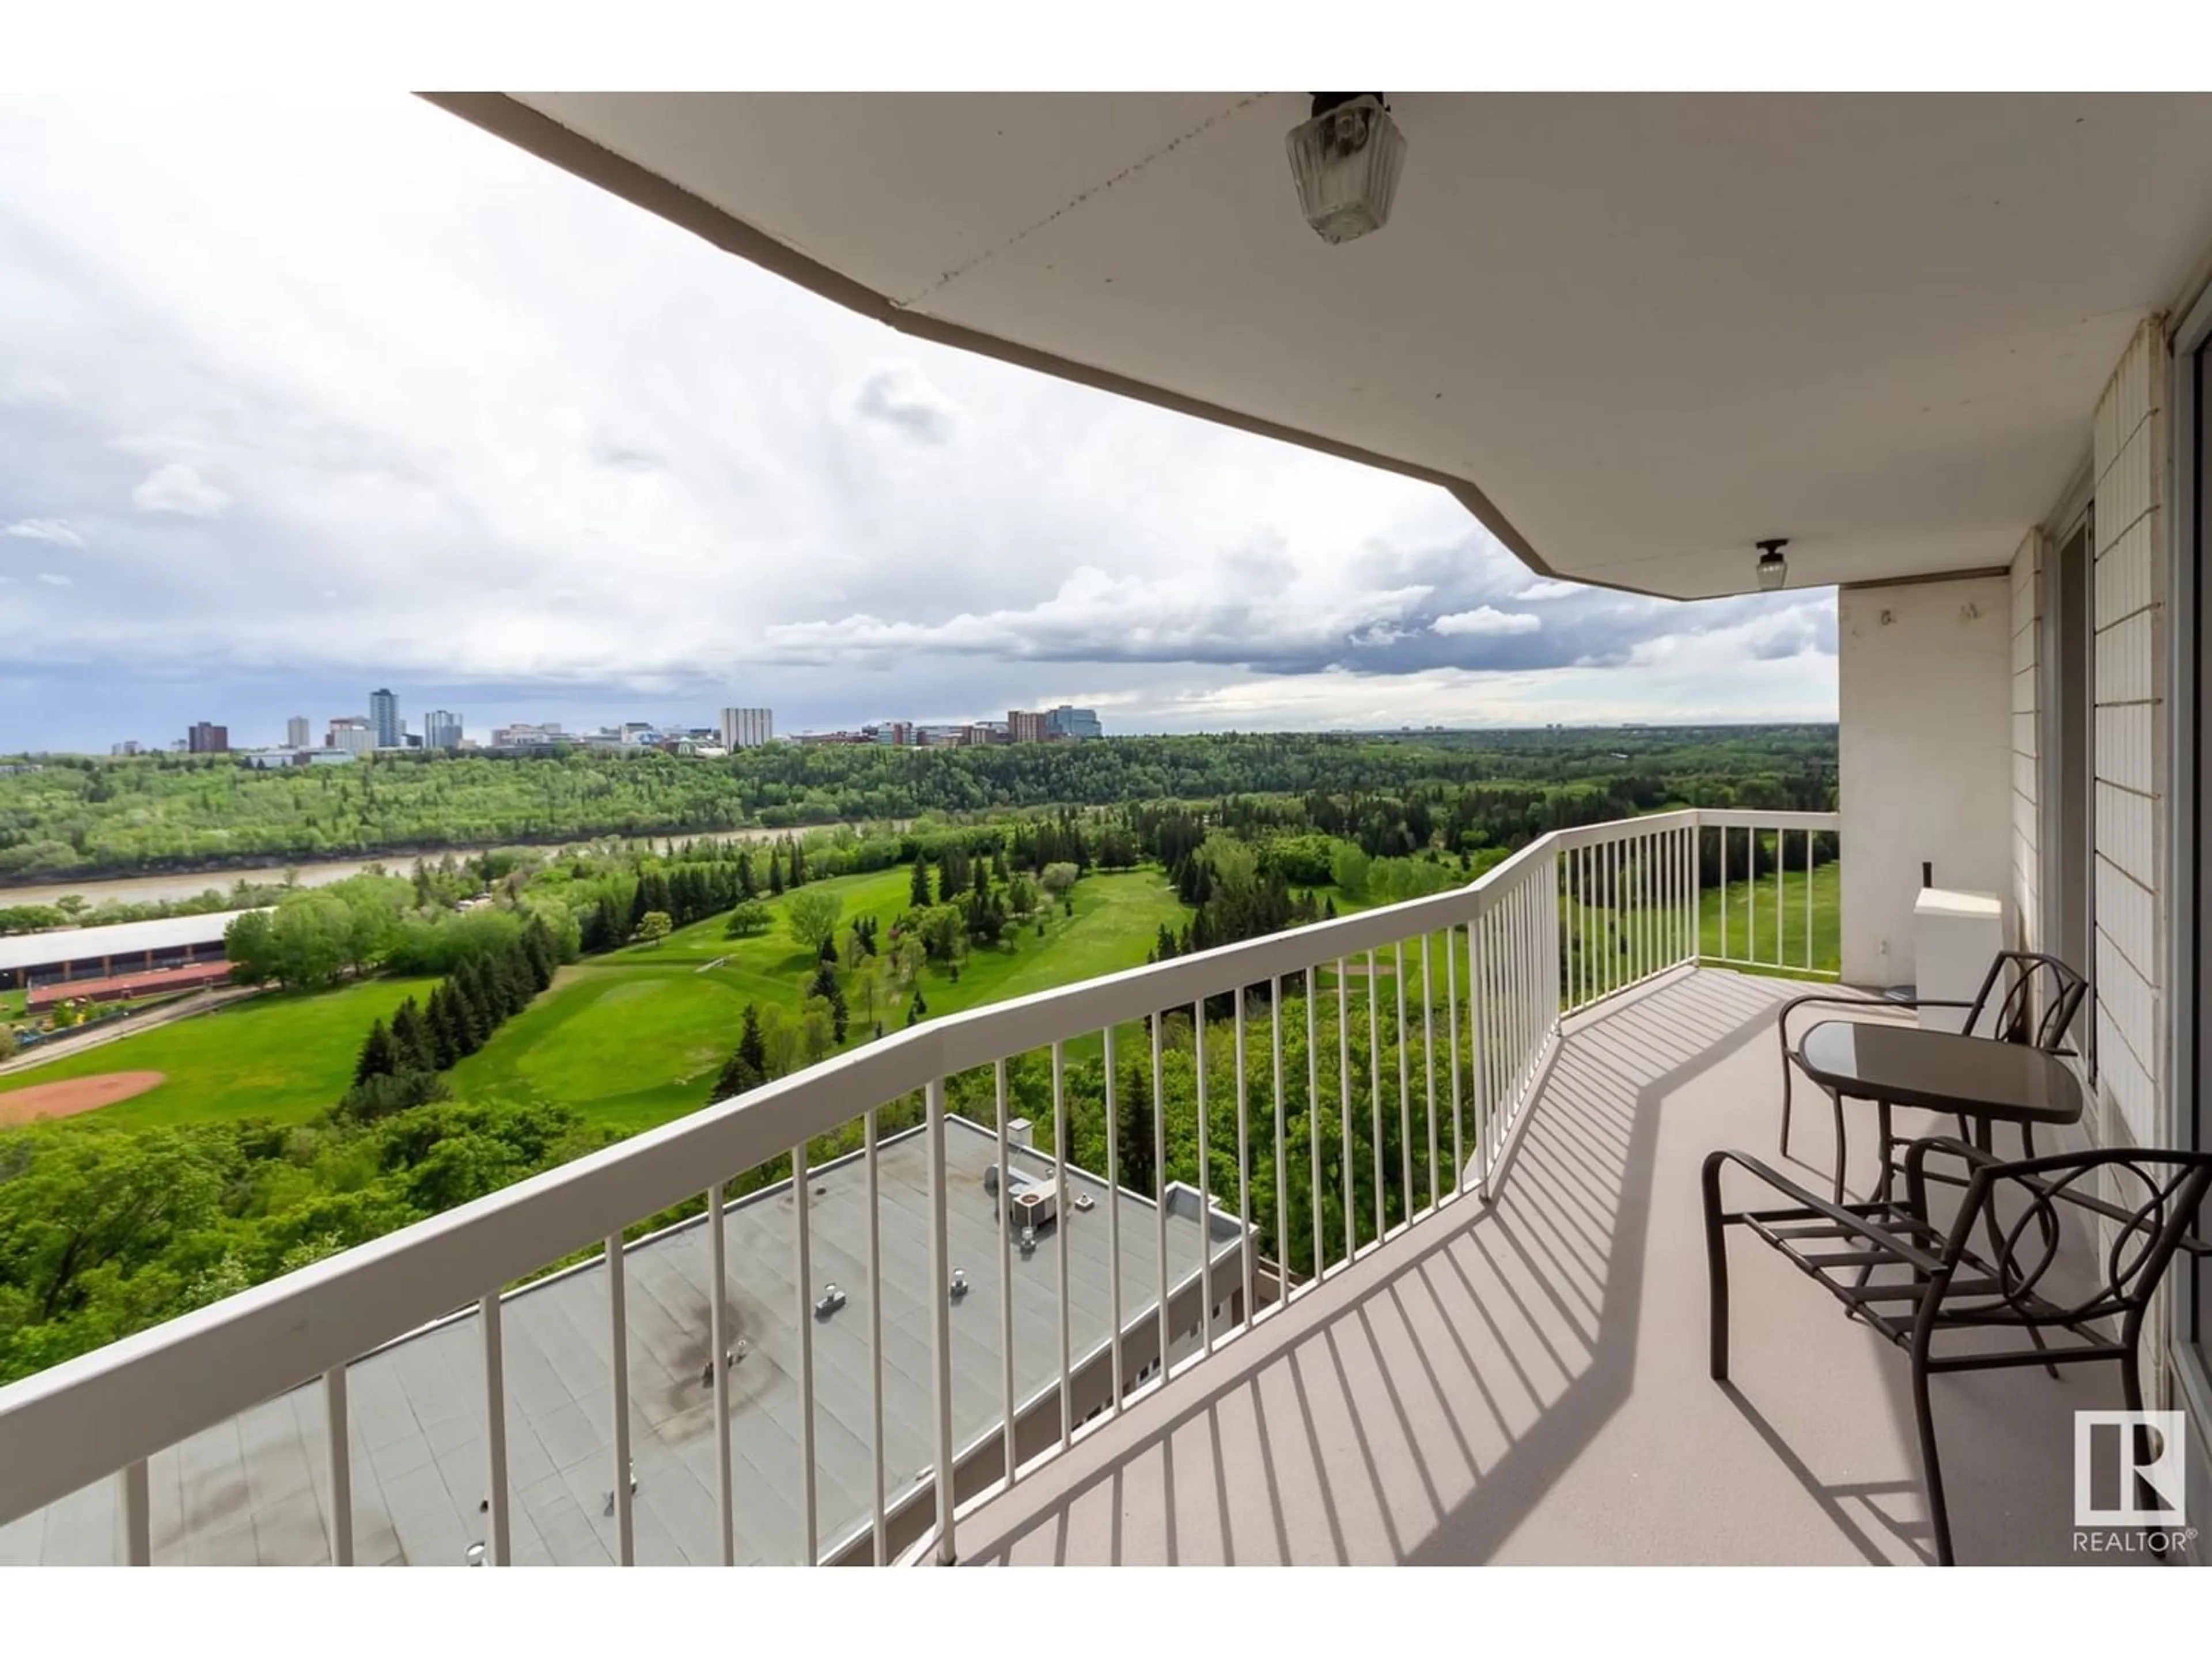 A pic from exterior of the house or condo for #802 9835 113 ST NW, Edmonton Alberta T5K1N4